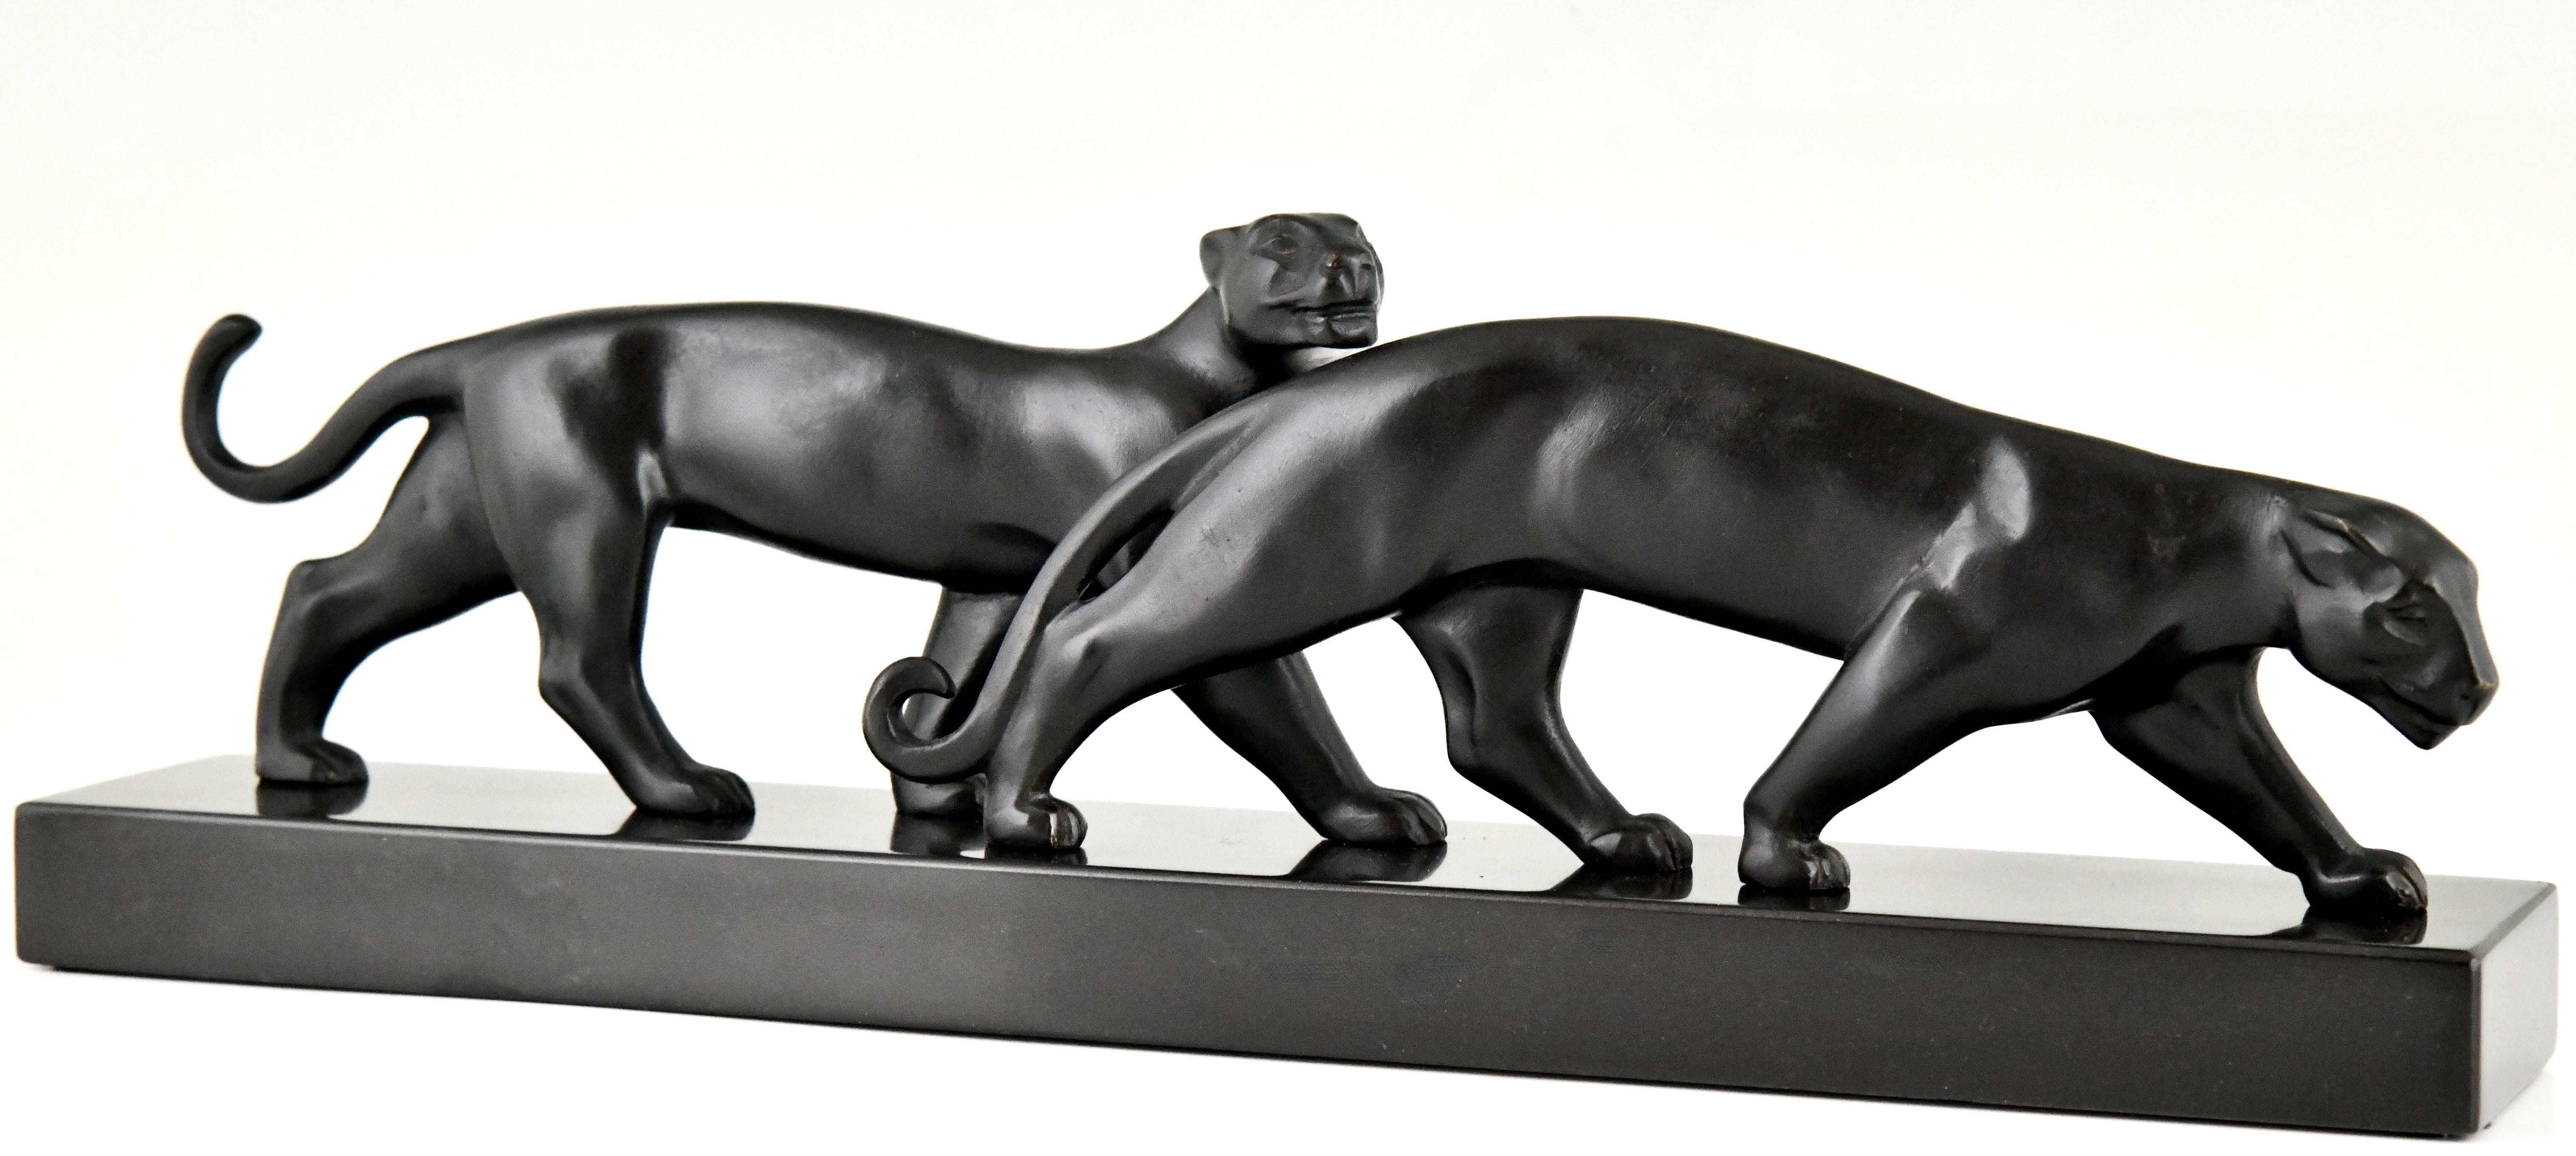 Art Deco bronze sculpture of two panthers Lucien Alliot.
Black patinated bronze.
Belgian Black marble base.
France 1930
 
Literature:
Art Deco sculpture by Victor Arwas, Academy.
Bronzes, sculptors and founders by H. Berman, Abage.
Dictionnaire des